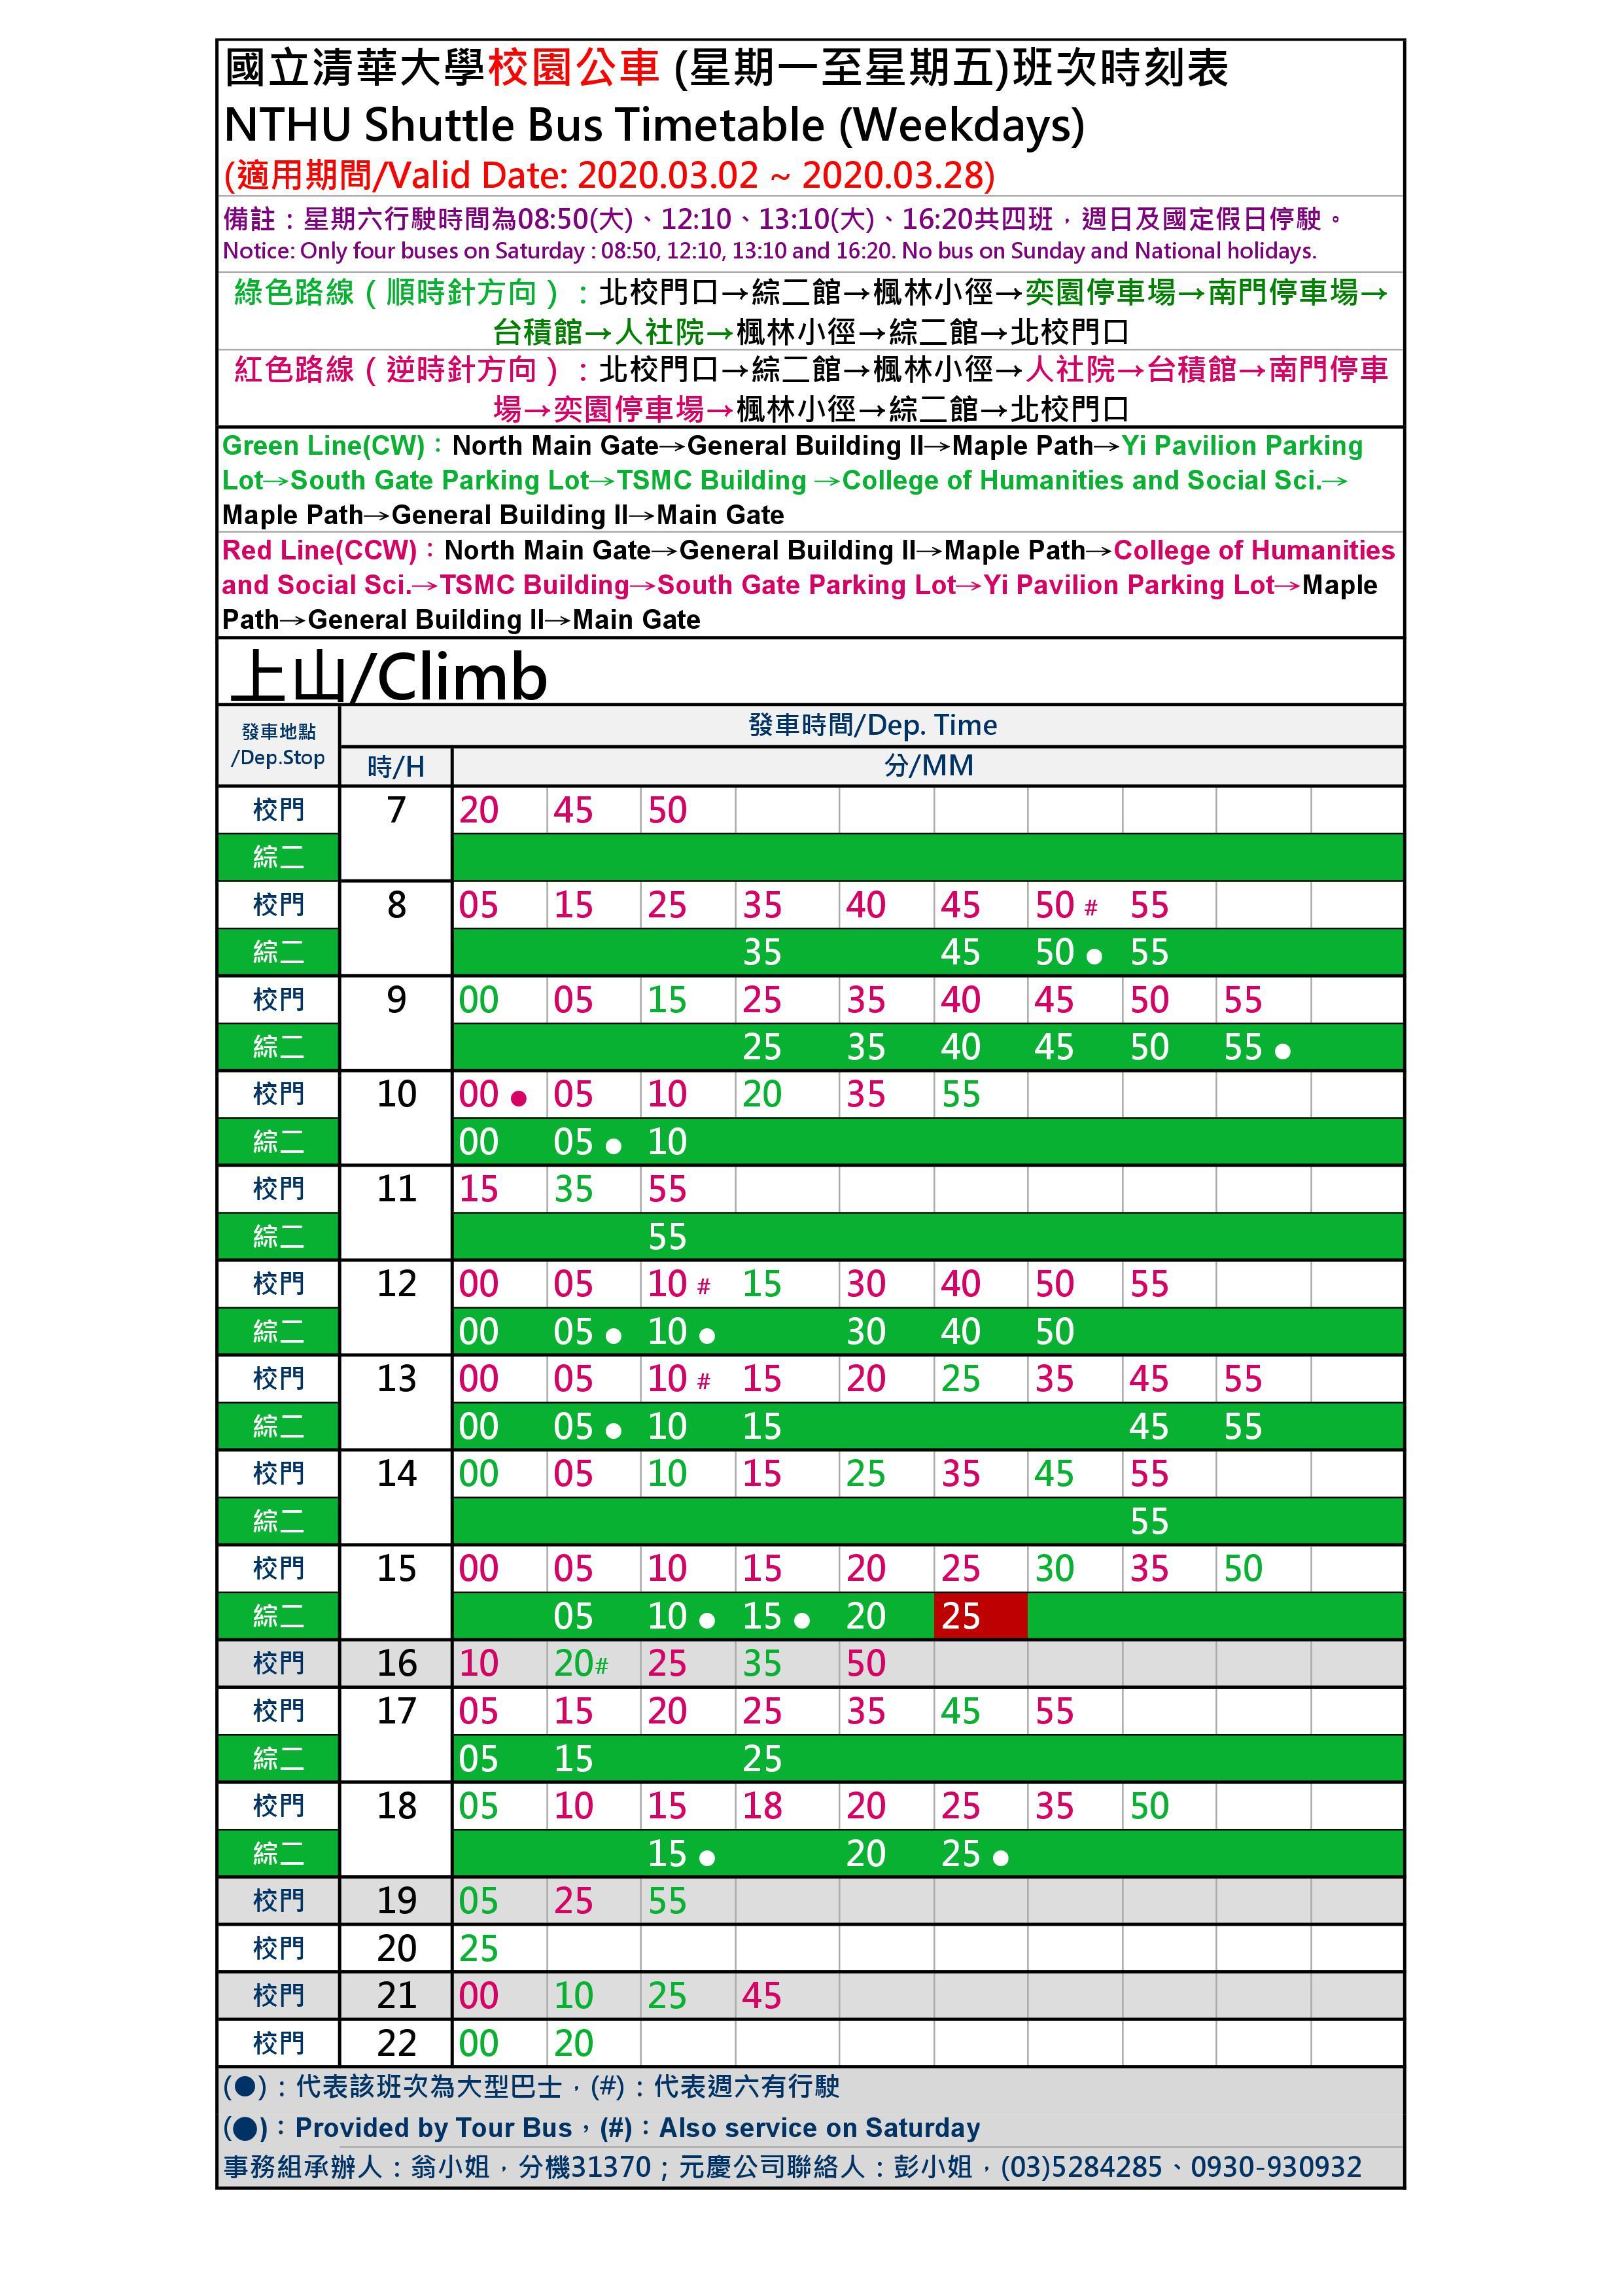 NTHU Shuttle Bus Timetable 2020.01.13~2020.02.15